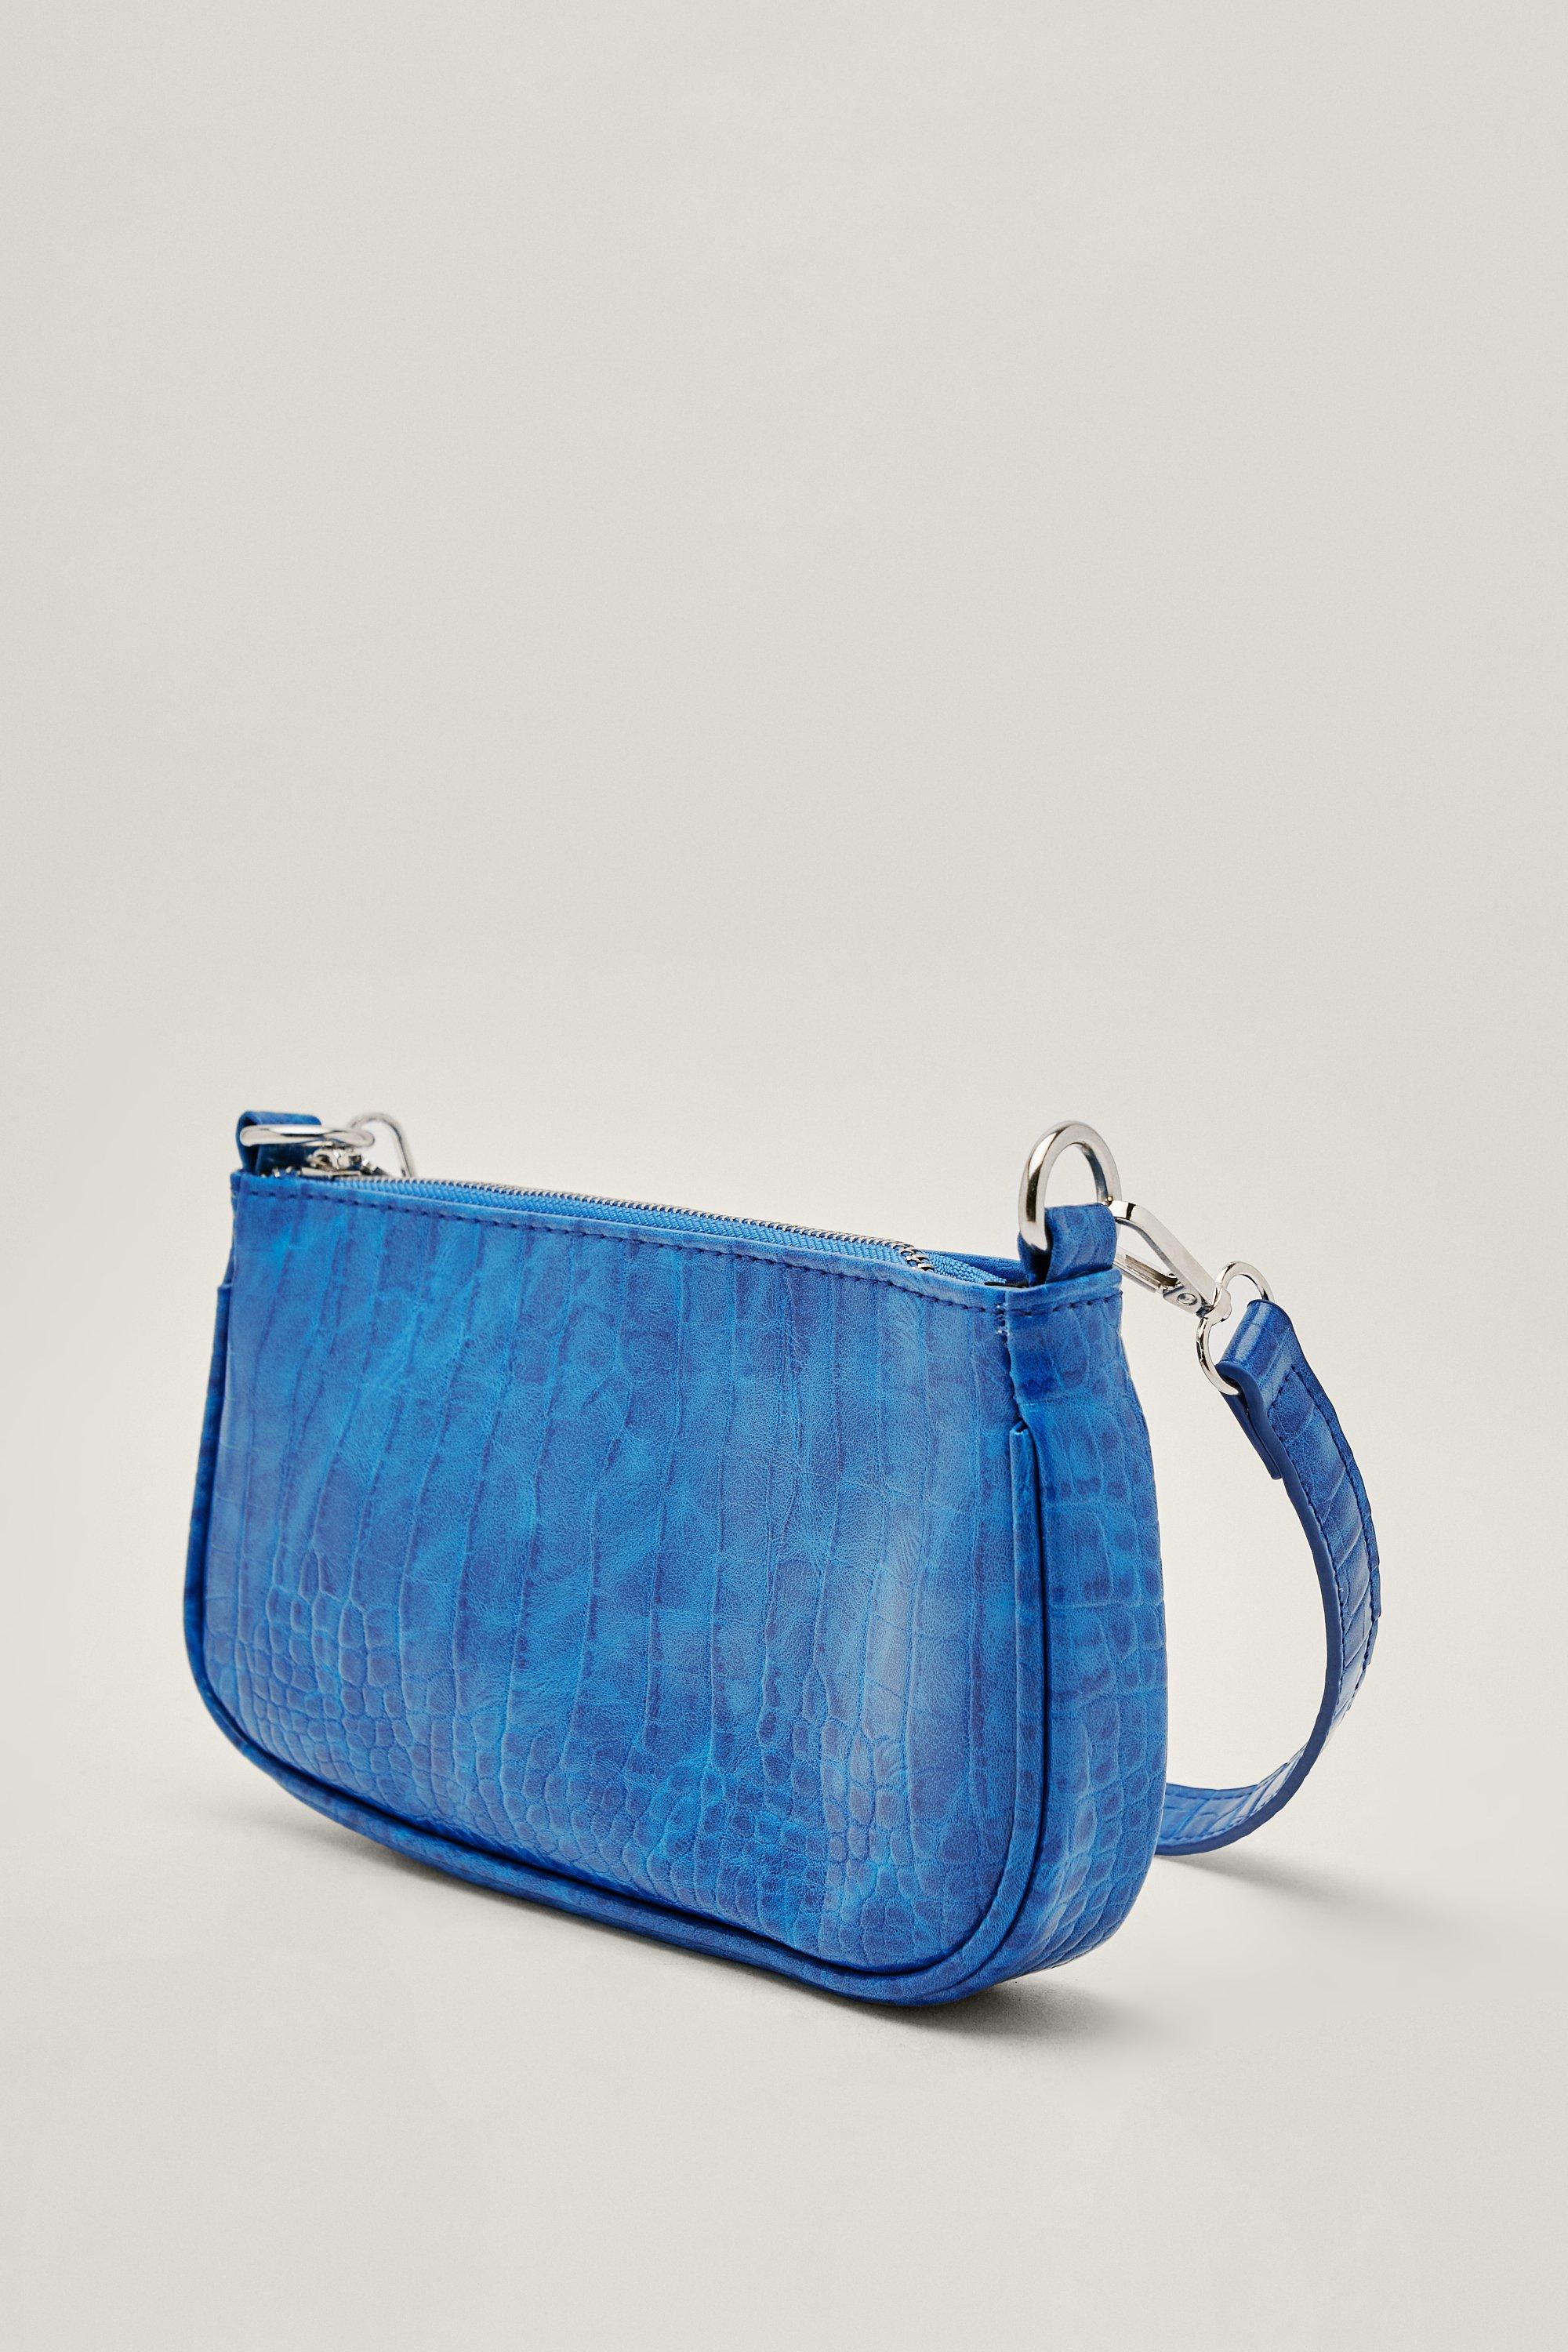 BY FAR Mini Bag In Sky Blue Croco Embossed Leather